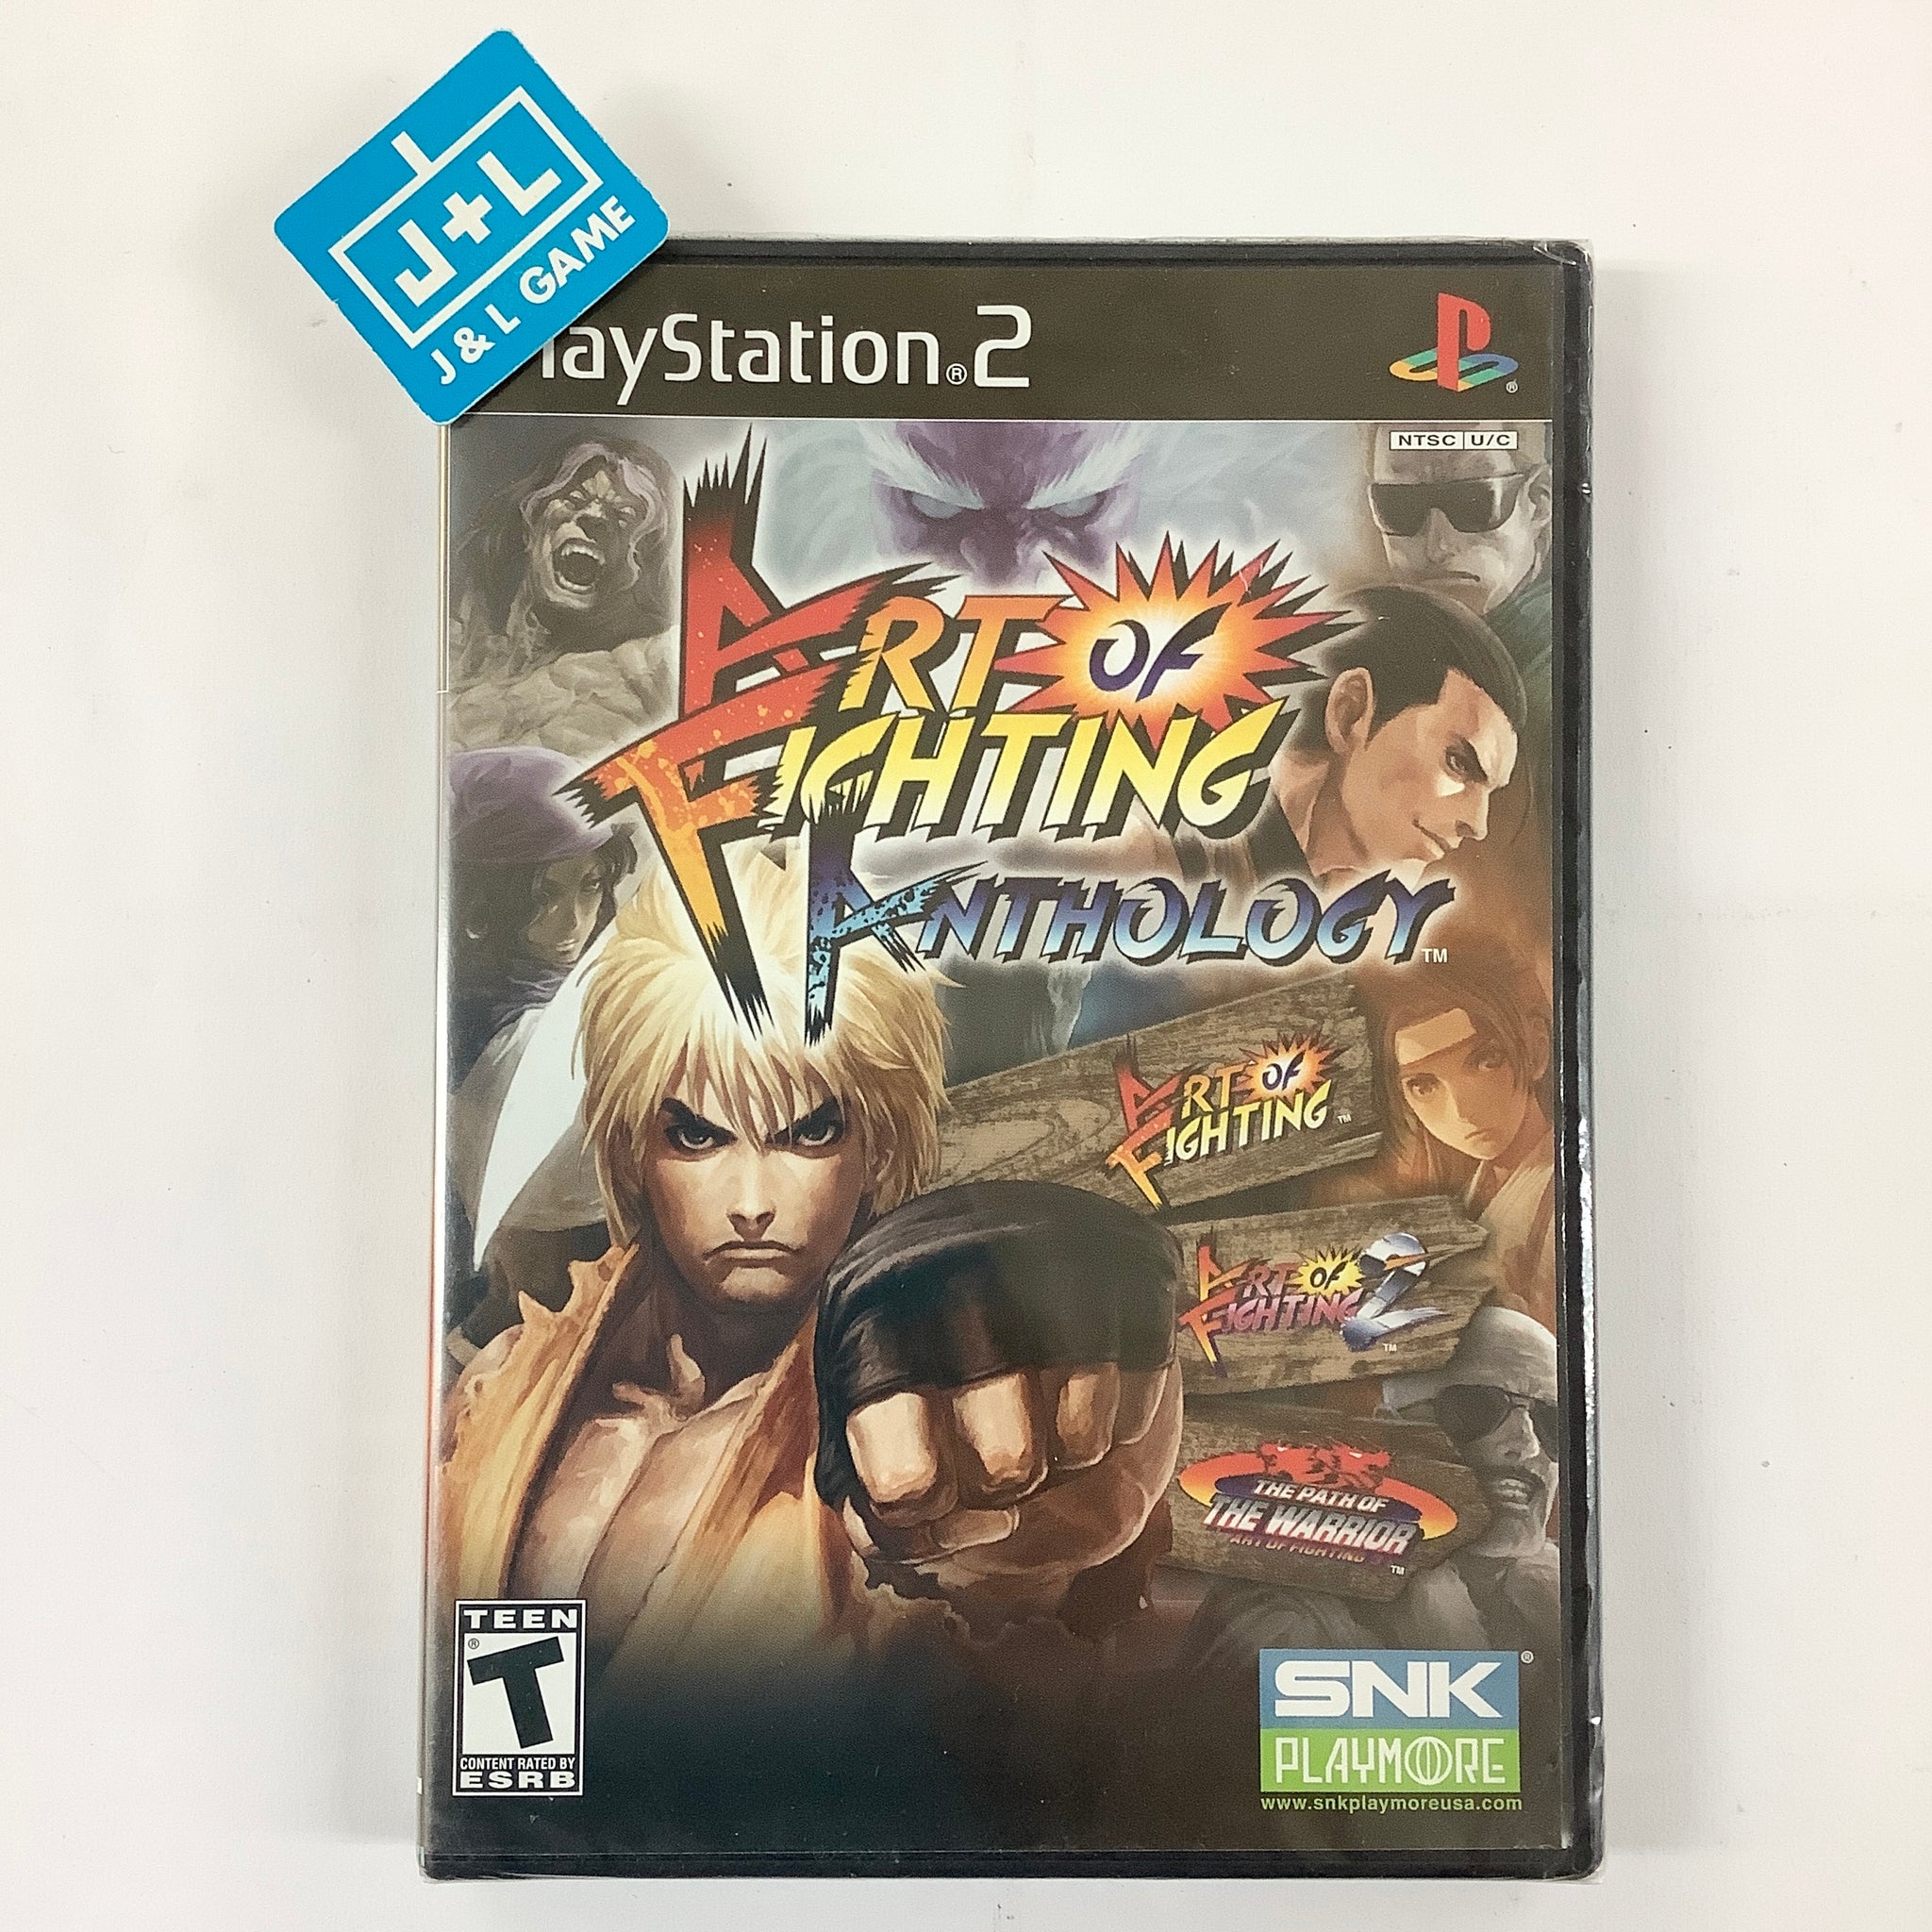 Checklist SNK Playmore - PS2 Games